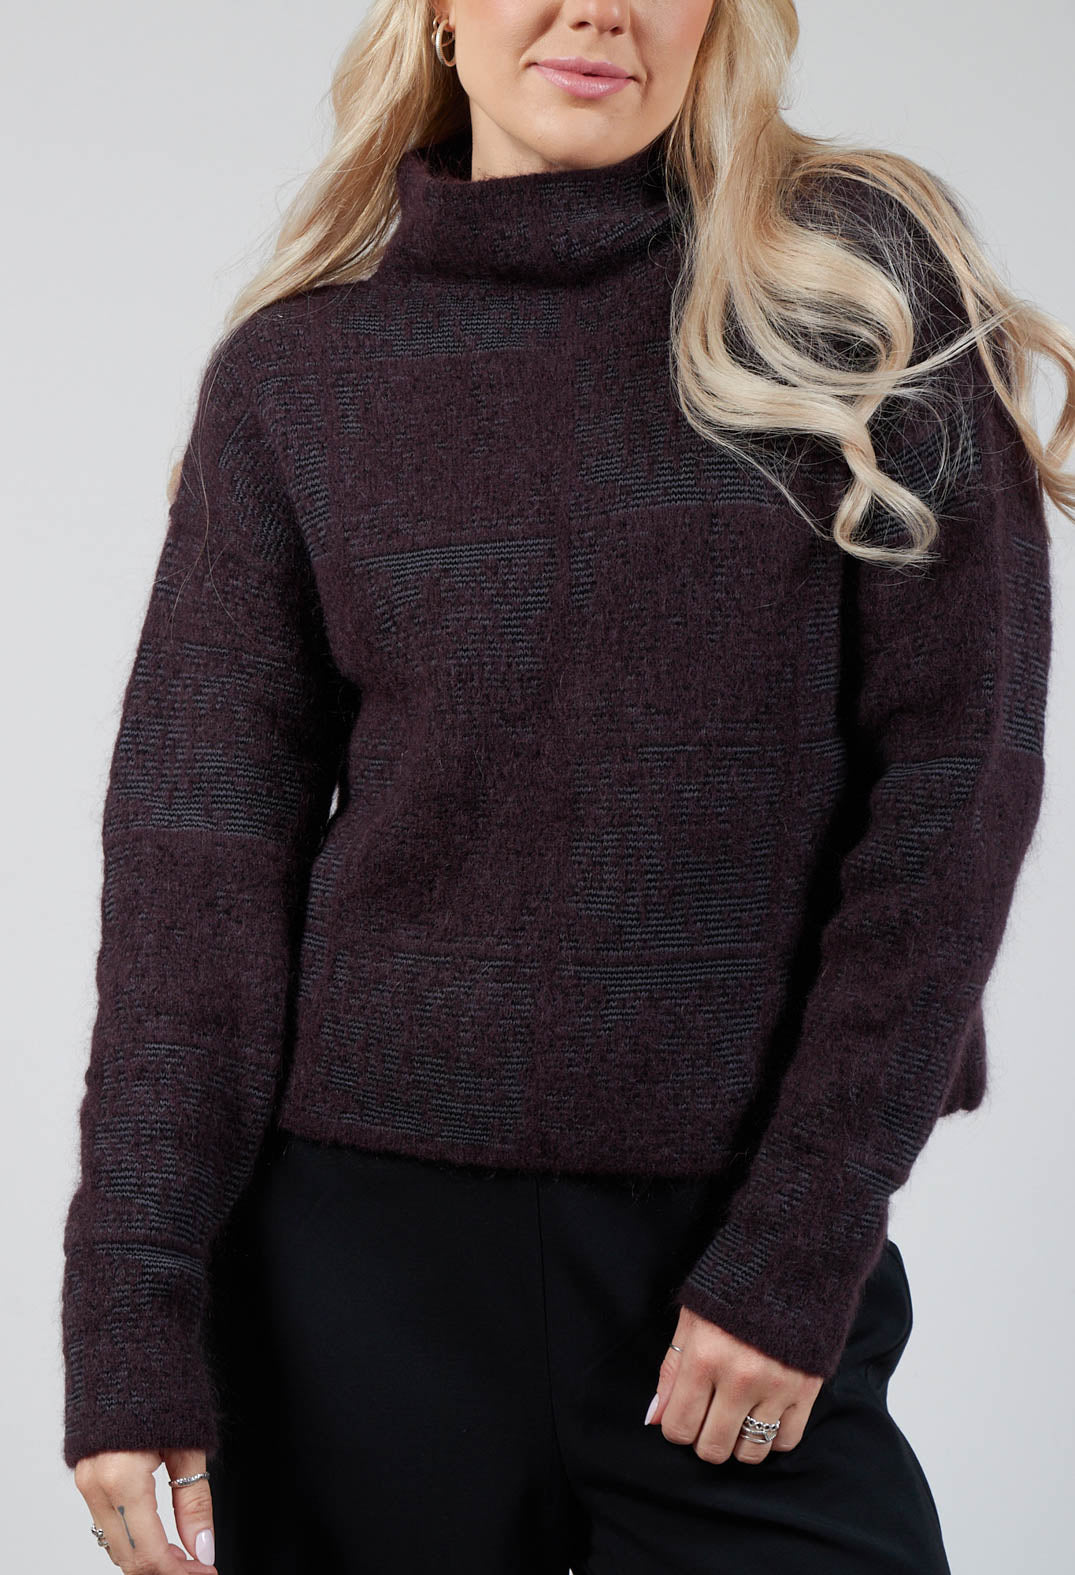 Jumper with Check Design in Plum